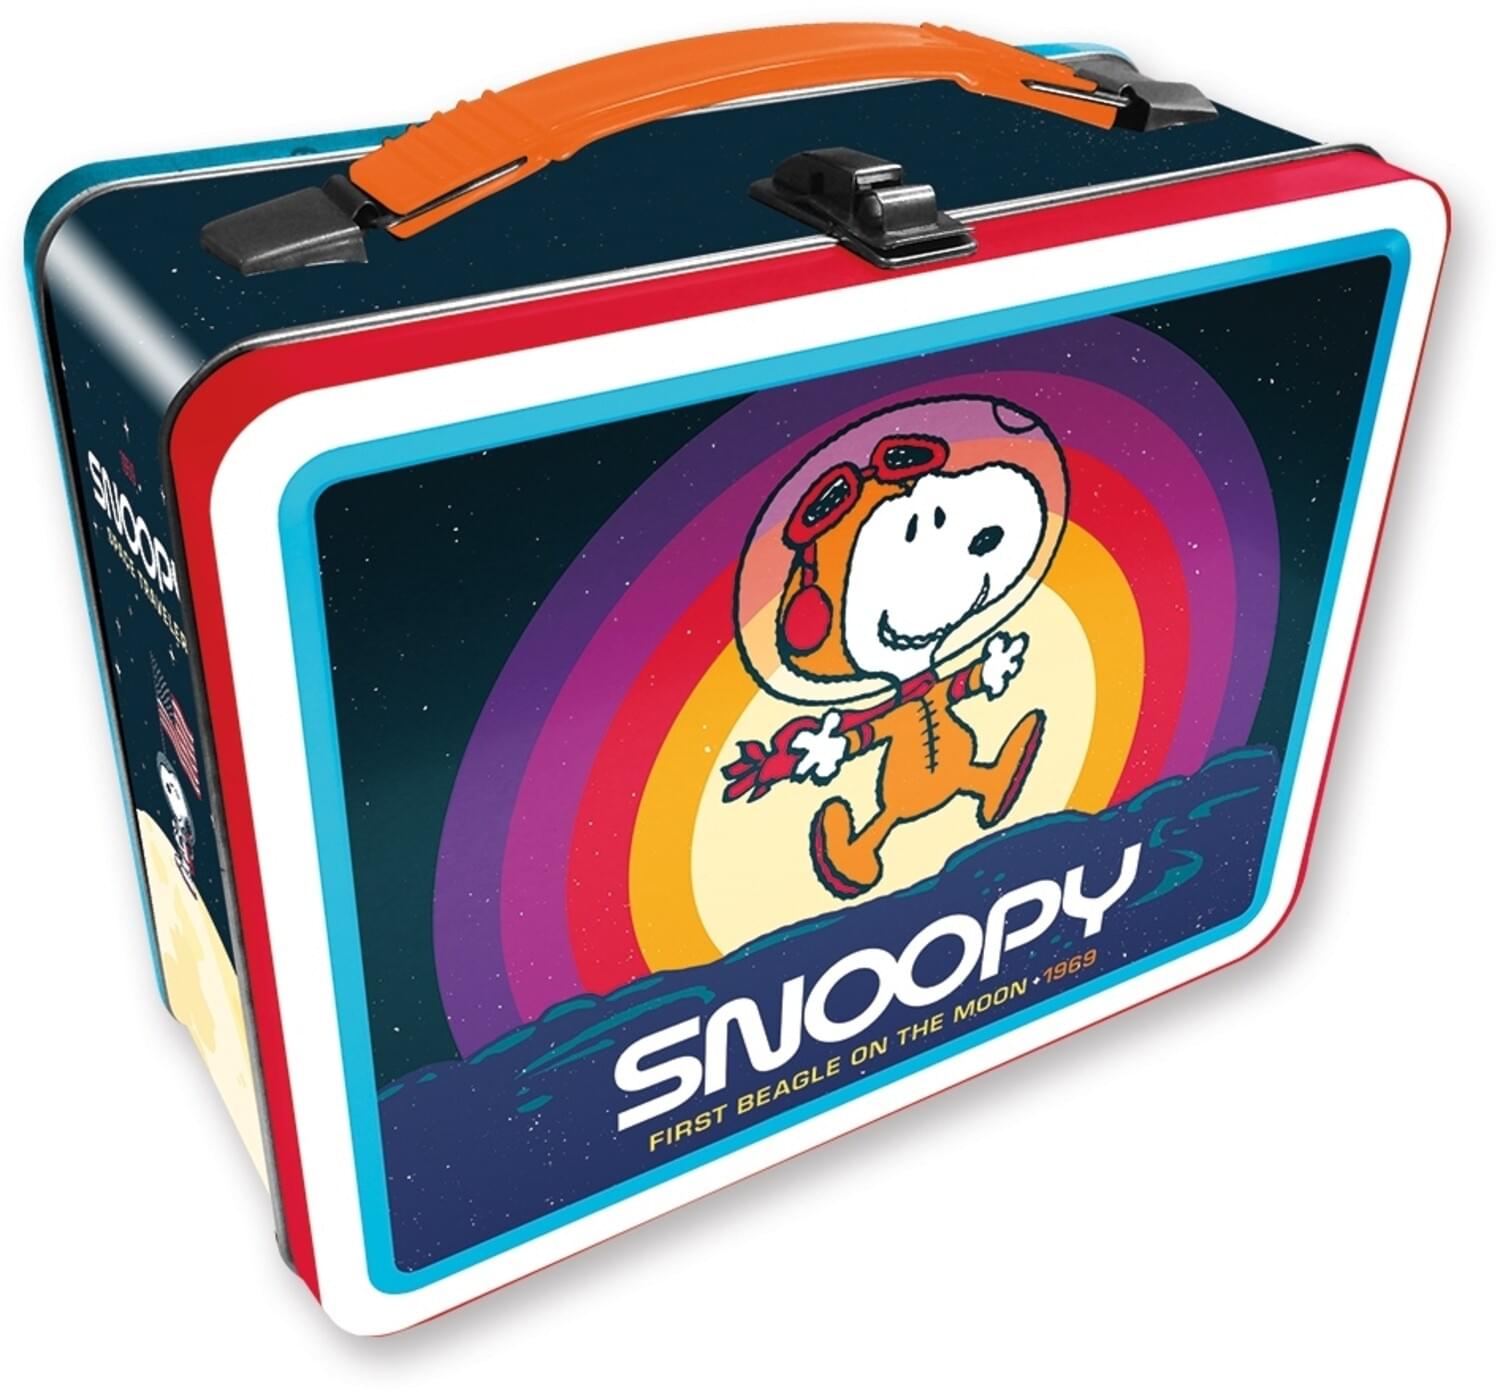 Peanuts Snoopy In Space Retro Style Tin Tote